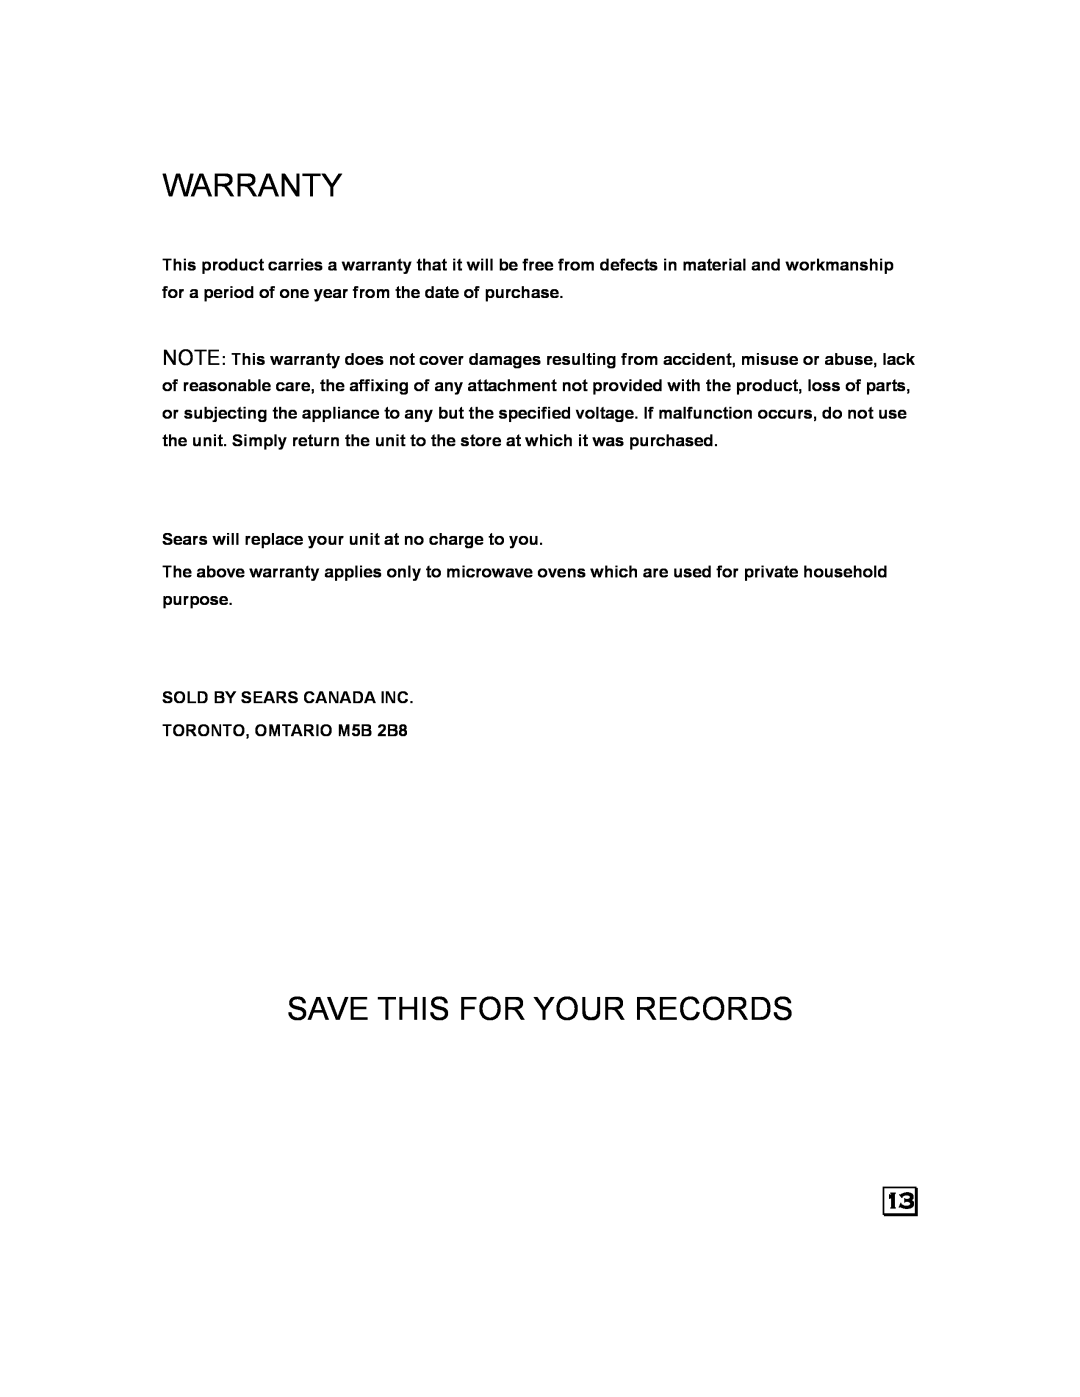 Kenmore 87090 owner manual Warranty, Save This For Your Records 